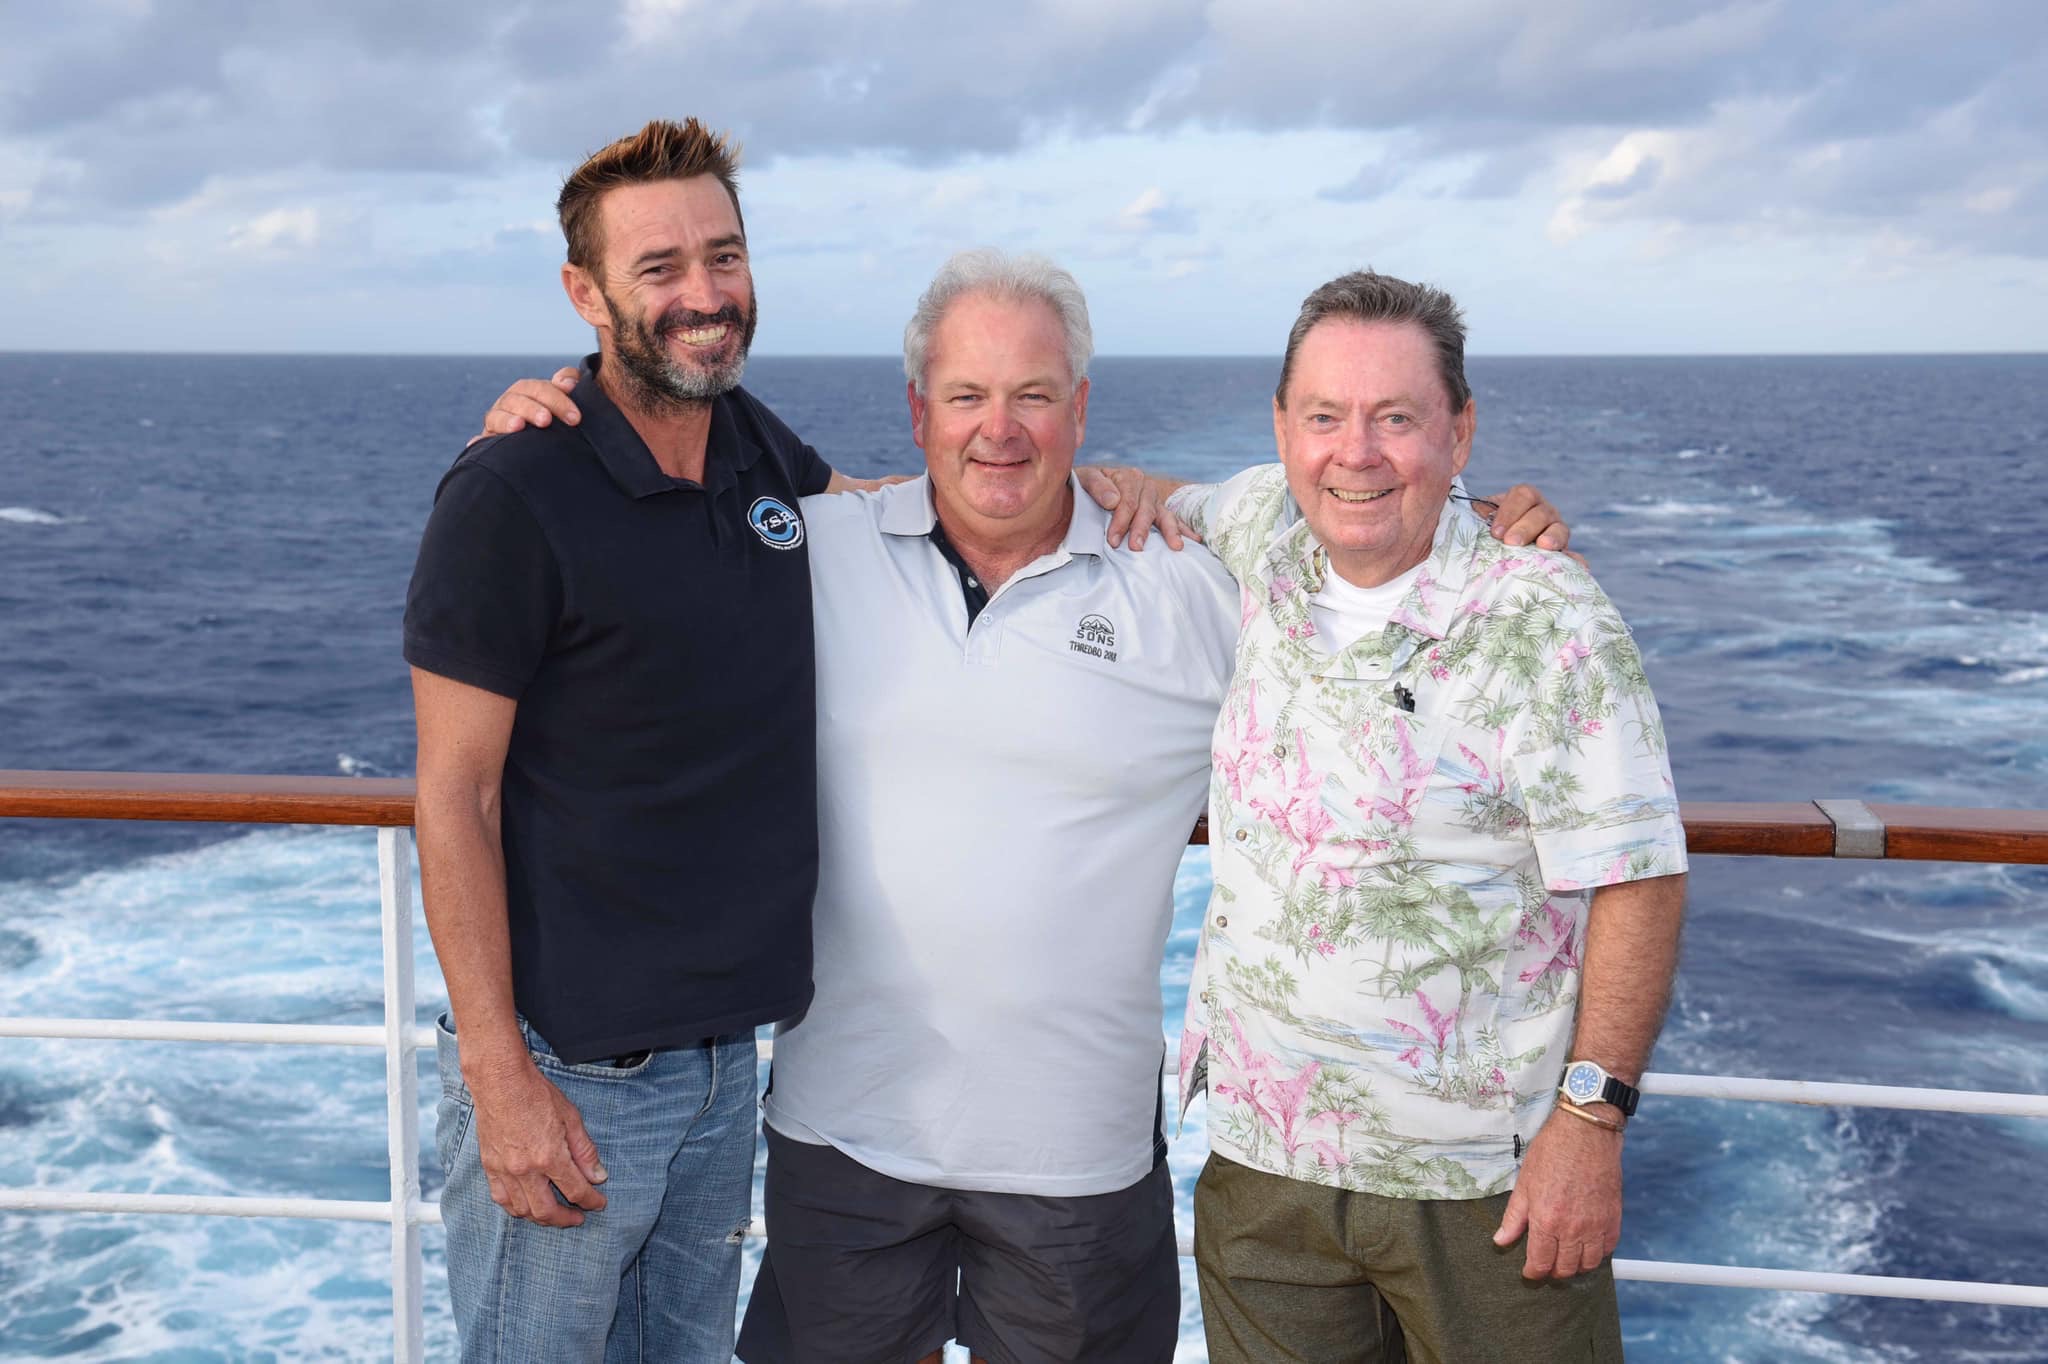 Ben, Chris and Kevin were rescued by Pacific Dawn